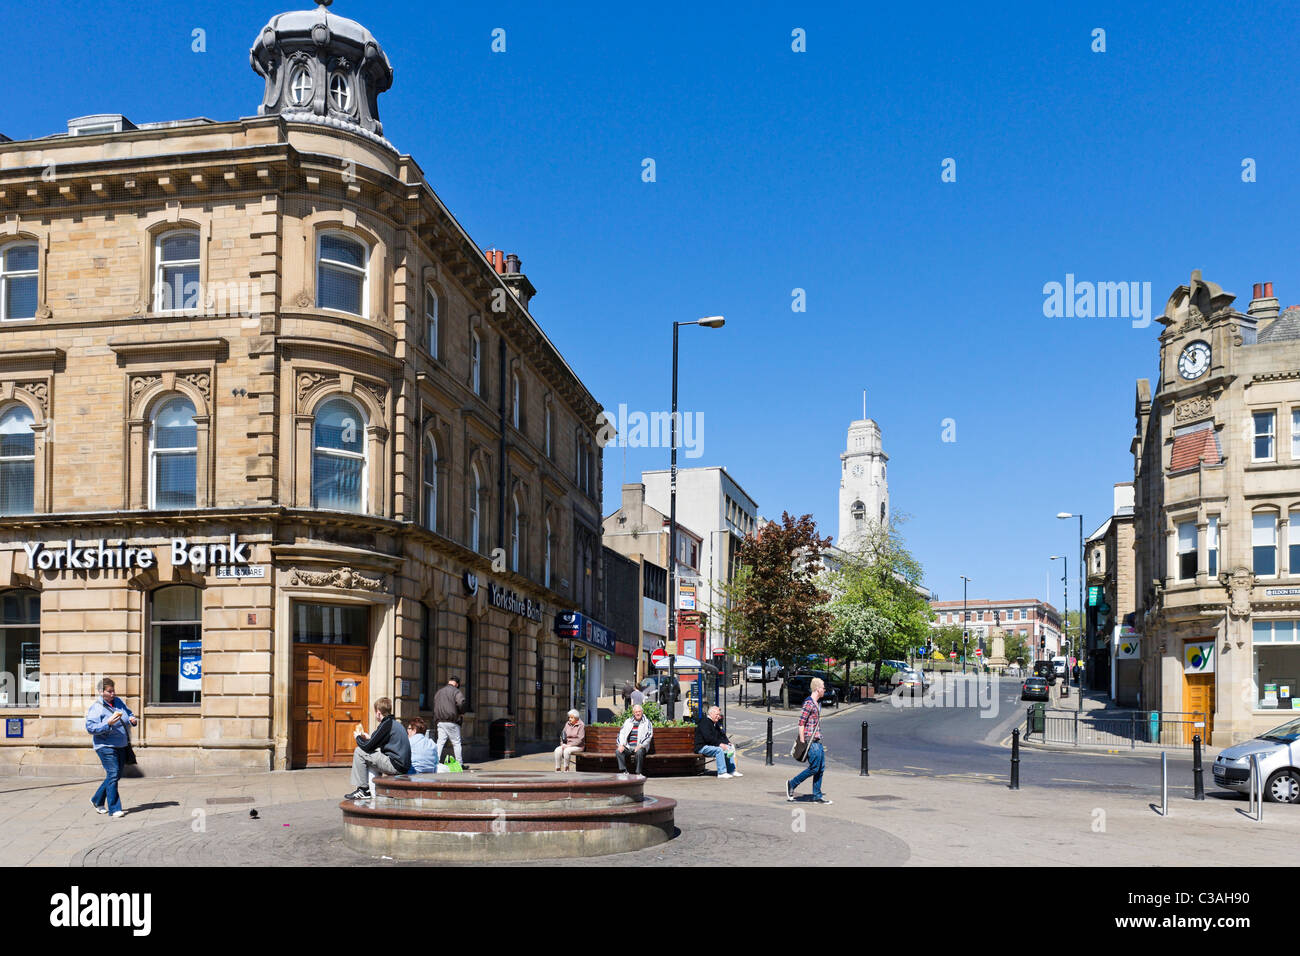 Peel Square in the town centre, Barnsley, West Yorkshire, UK Stock Photo